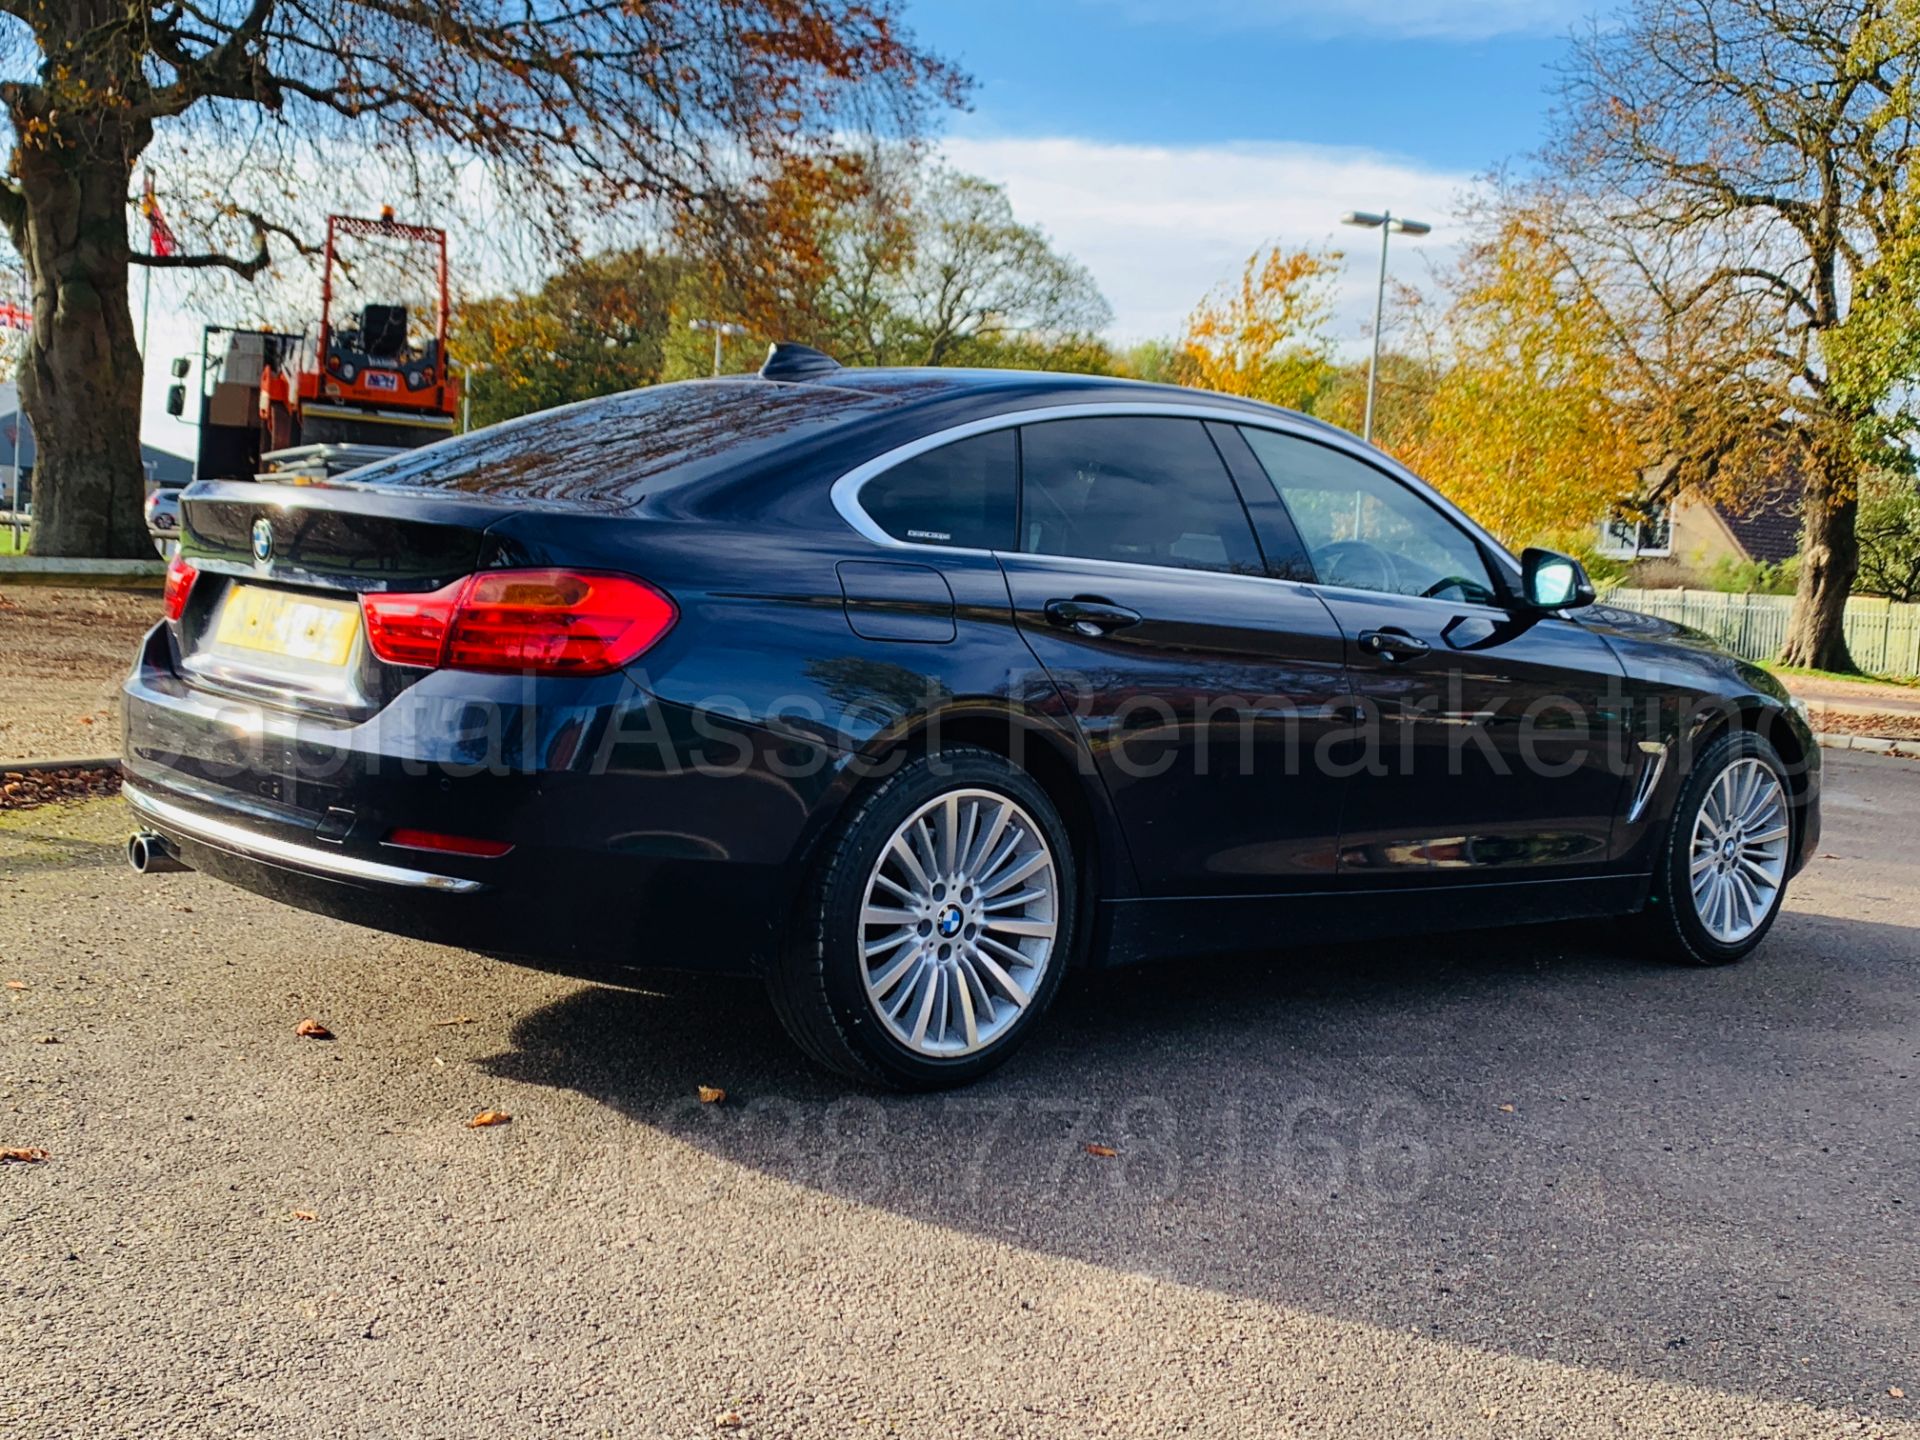 (ON SALE) BMW 430D 'X-DRIVE' GRAN COUPE *LUXURY EDITION* (2015) '8 SPEED AUTO' (1 OWNER) - Image 10 of 53